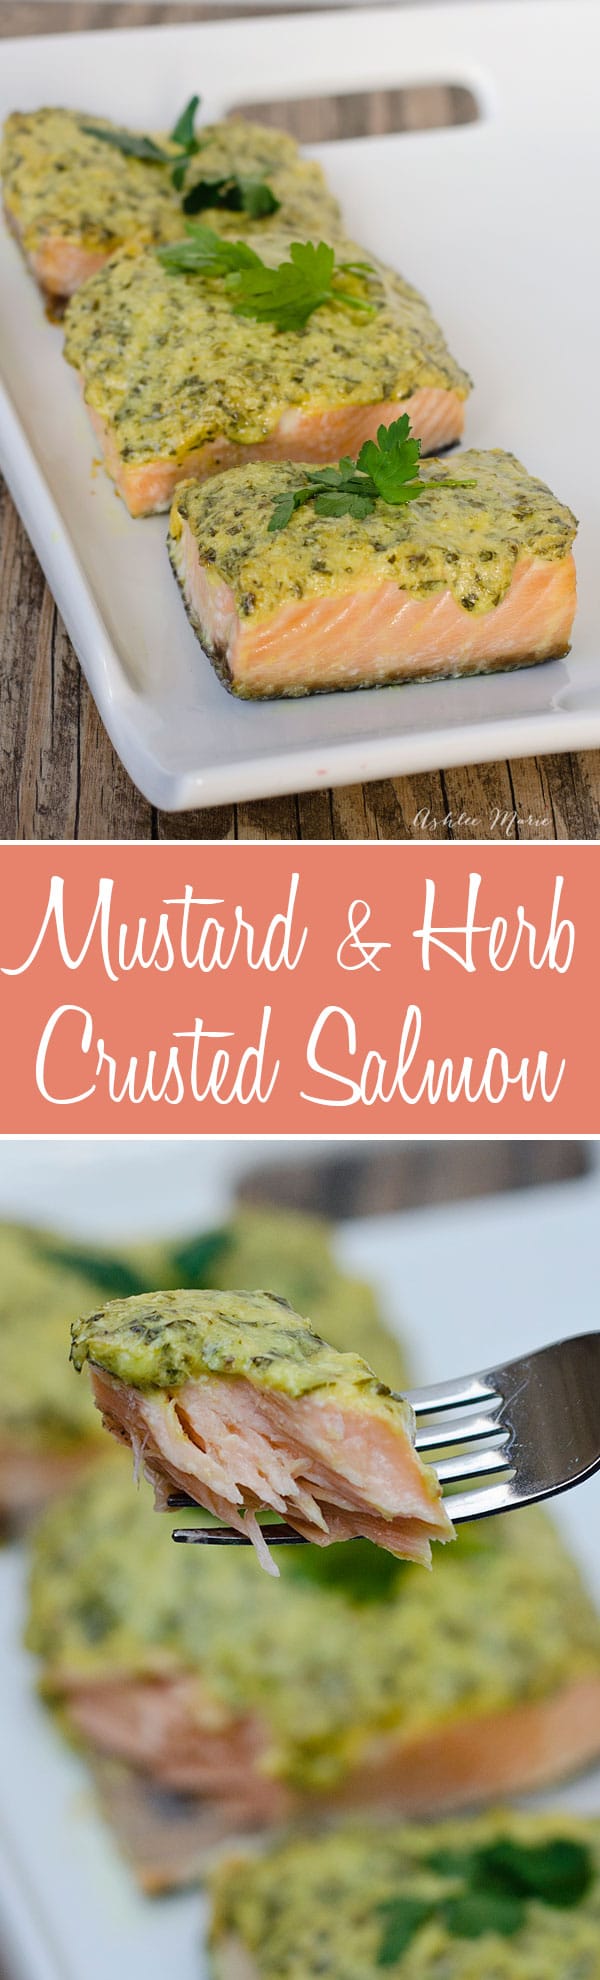 a delicious herb and mustard crusted salmon recipe, one of my families favorite ways to enjoy salmon